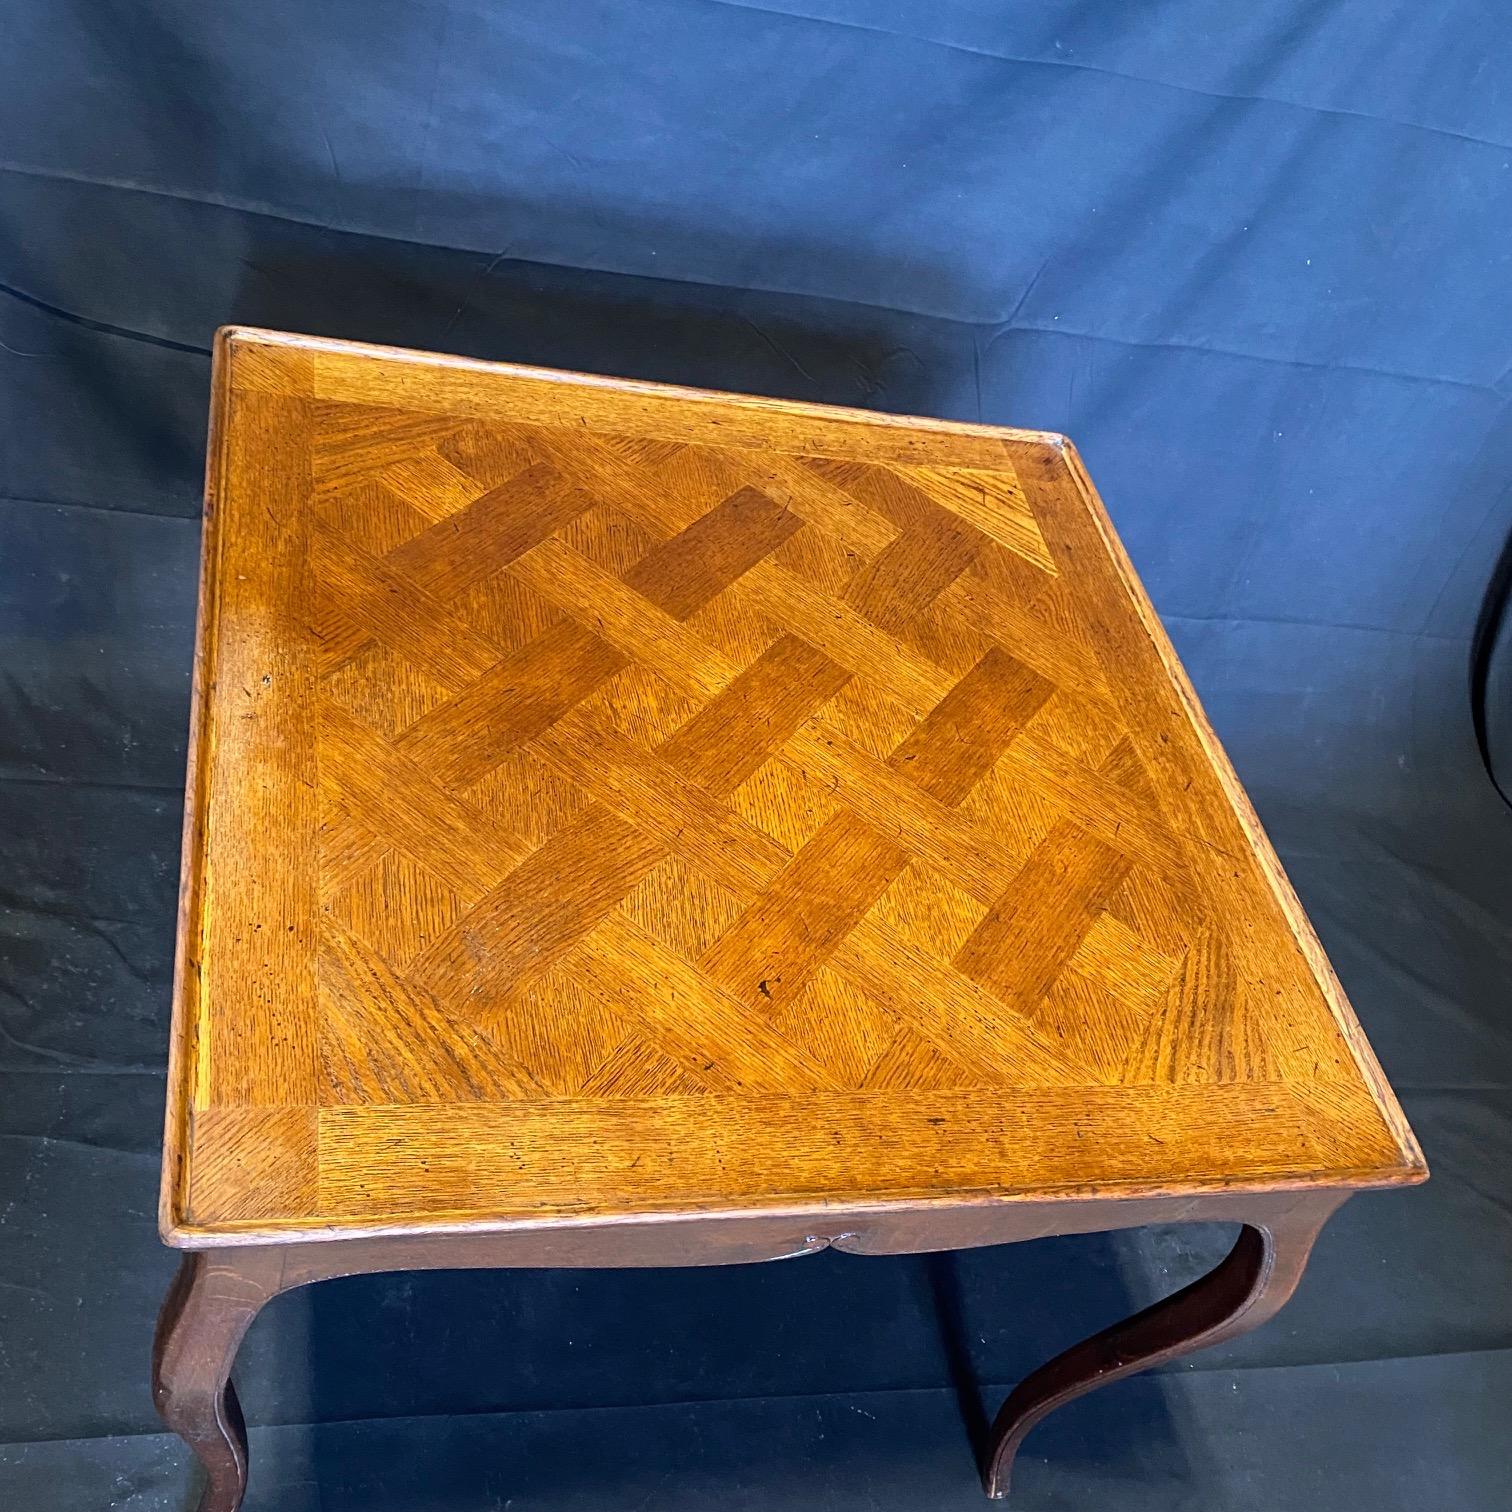 Really lovely classic Italian large side table or smaller desk with gracefully curved cabriole legs. Sturdy yet delicate oak table with beautiful rimmed carvings throughout legs and apron. The top displays a herringbone parquet pattern and the edges